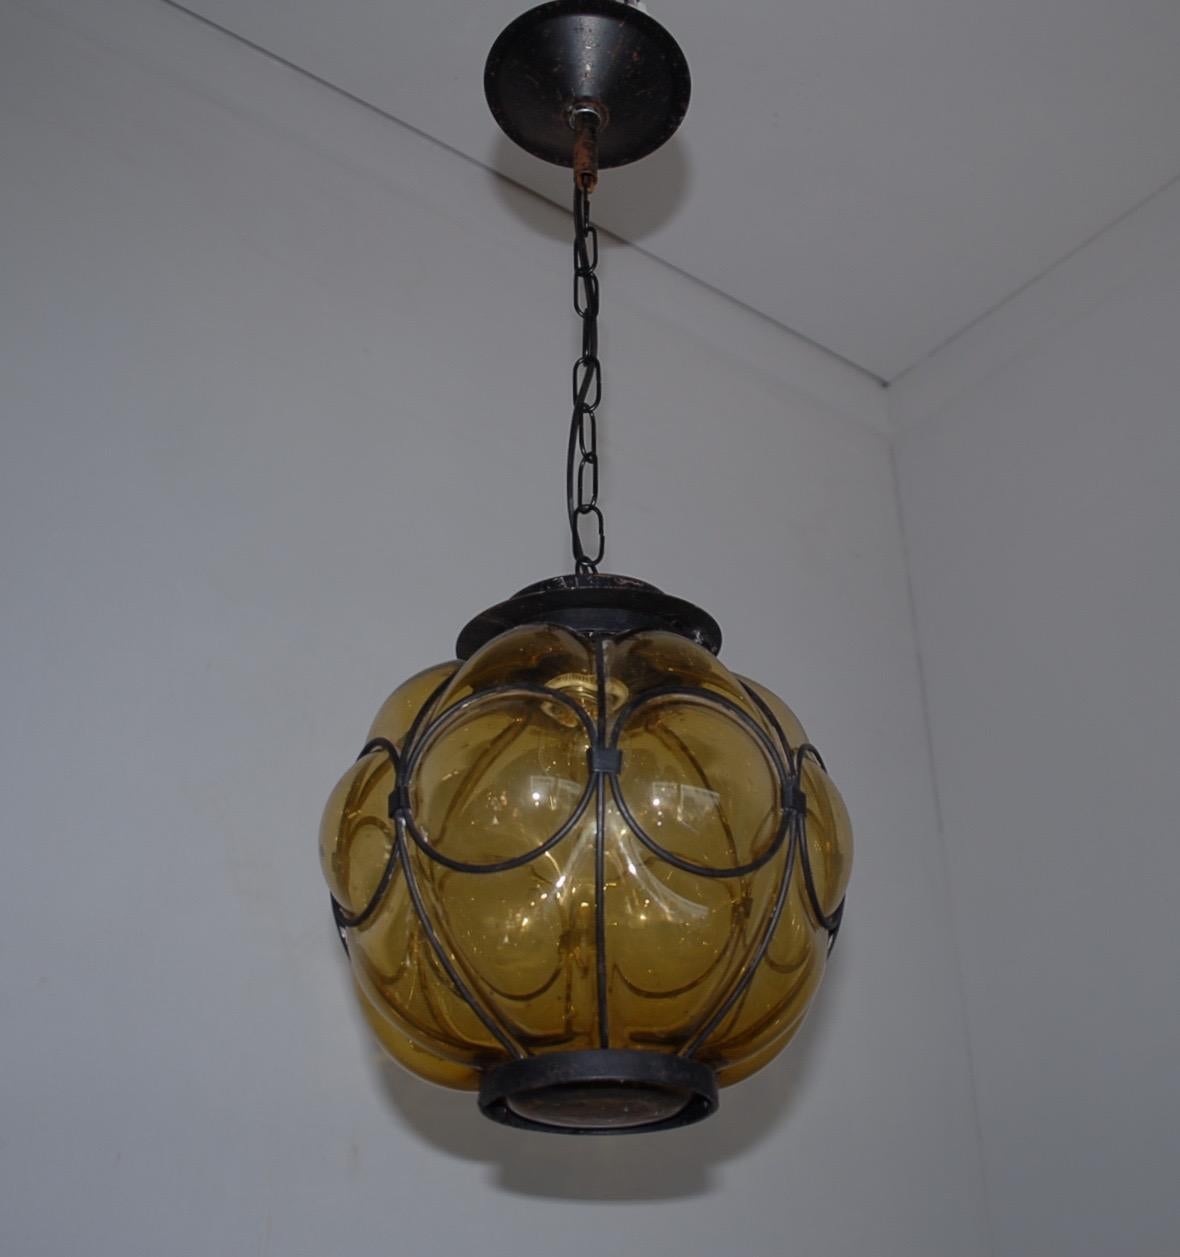 Rare & Handcrafted Midcentury Wrought Iron & Mouthblown Glass Venetian Pendant In Good Condition For Sale In Lisse, NL